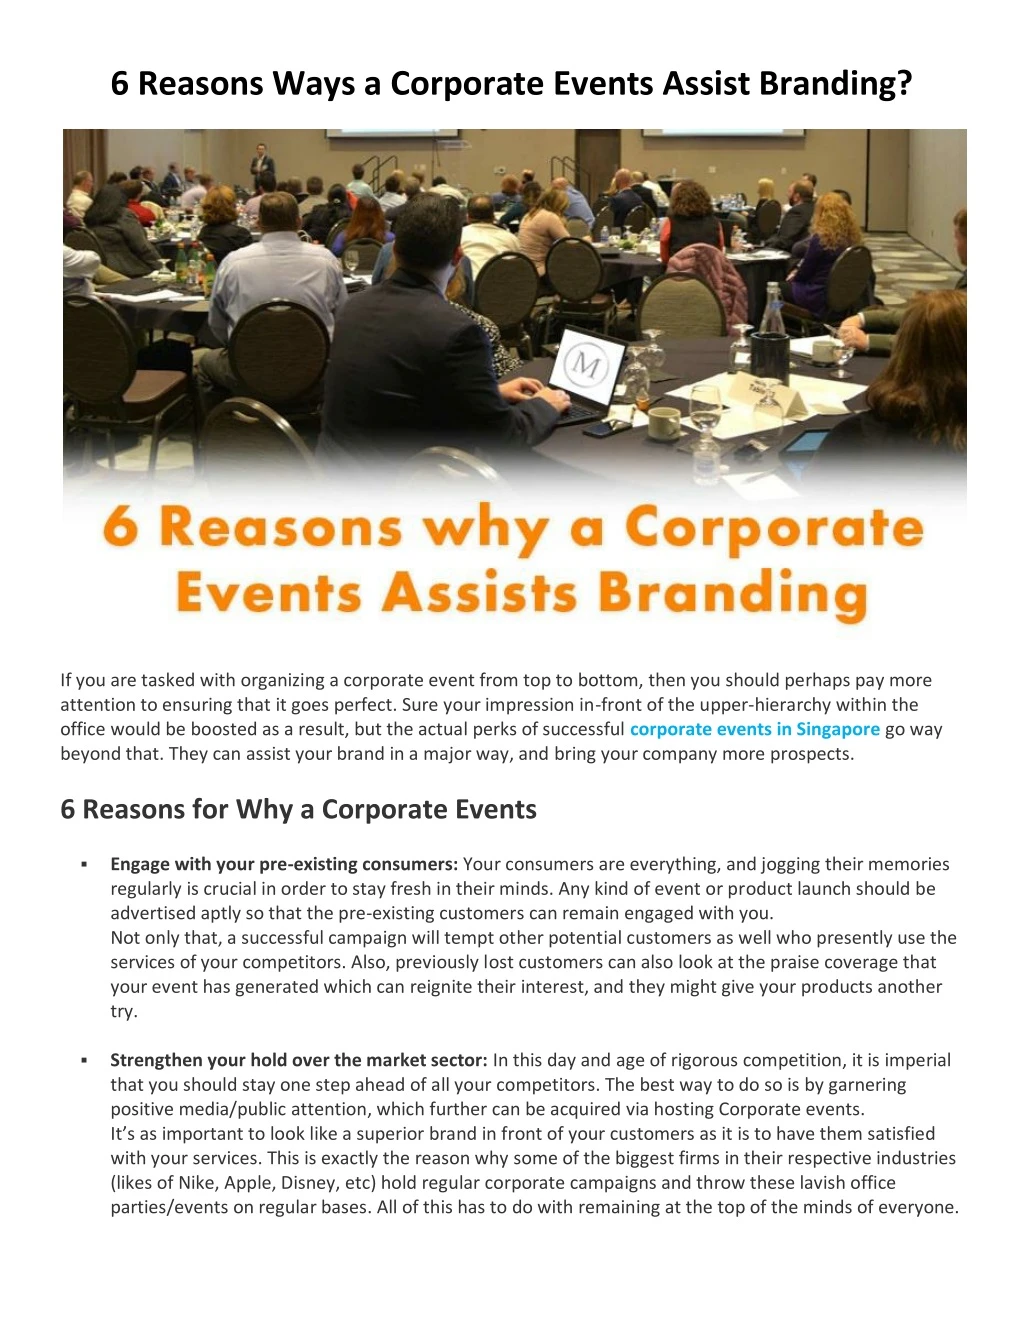 6 reasons ways a corporate events assist branding